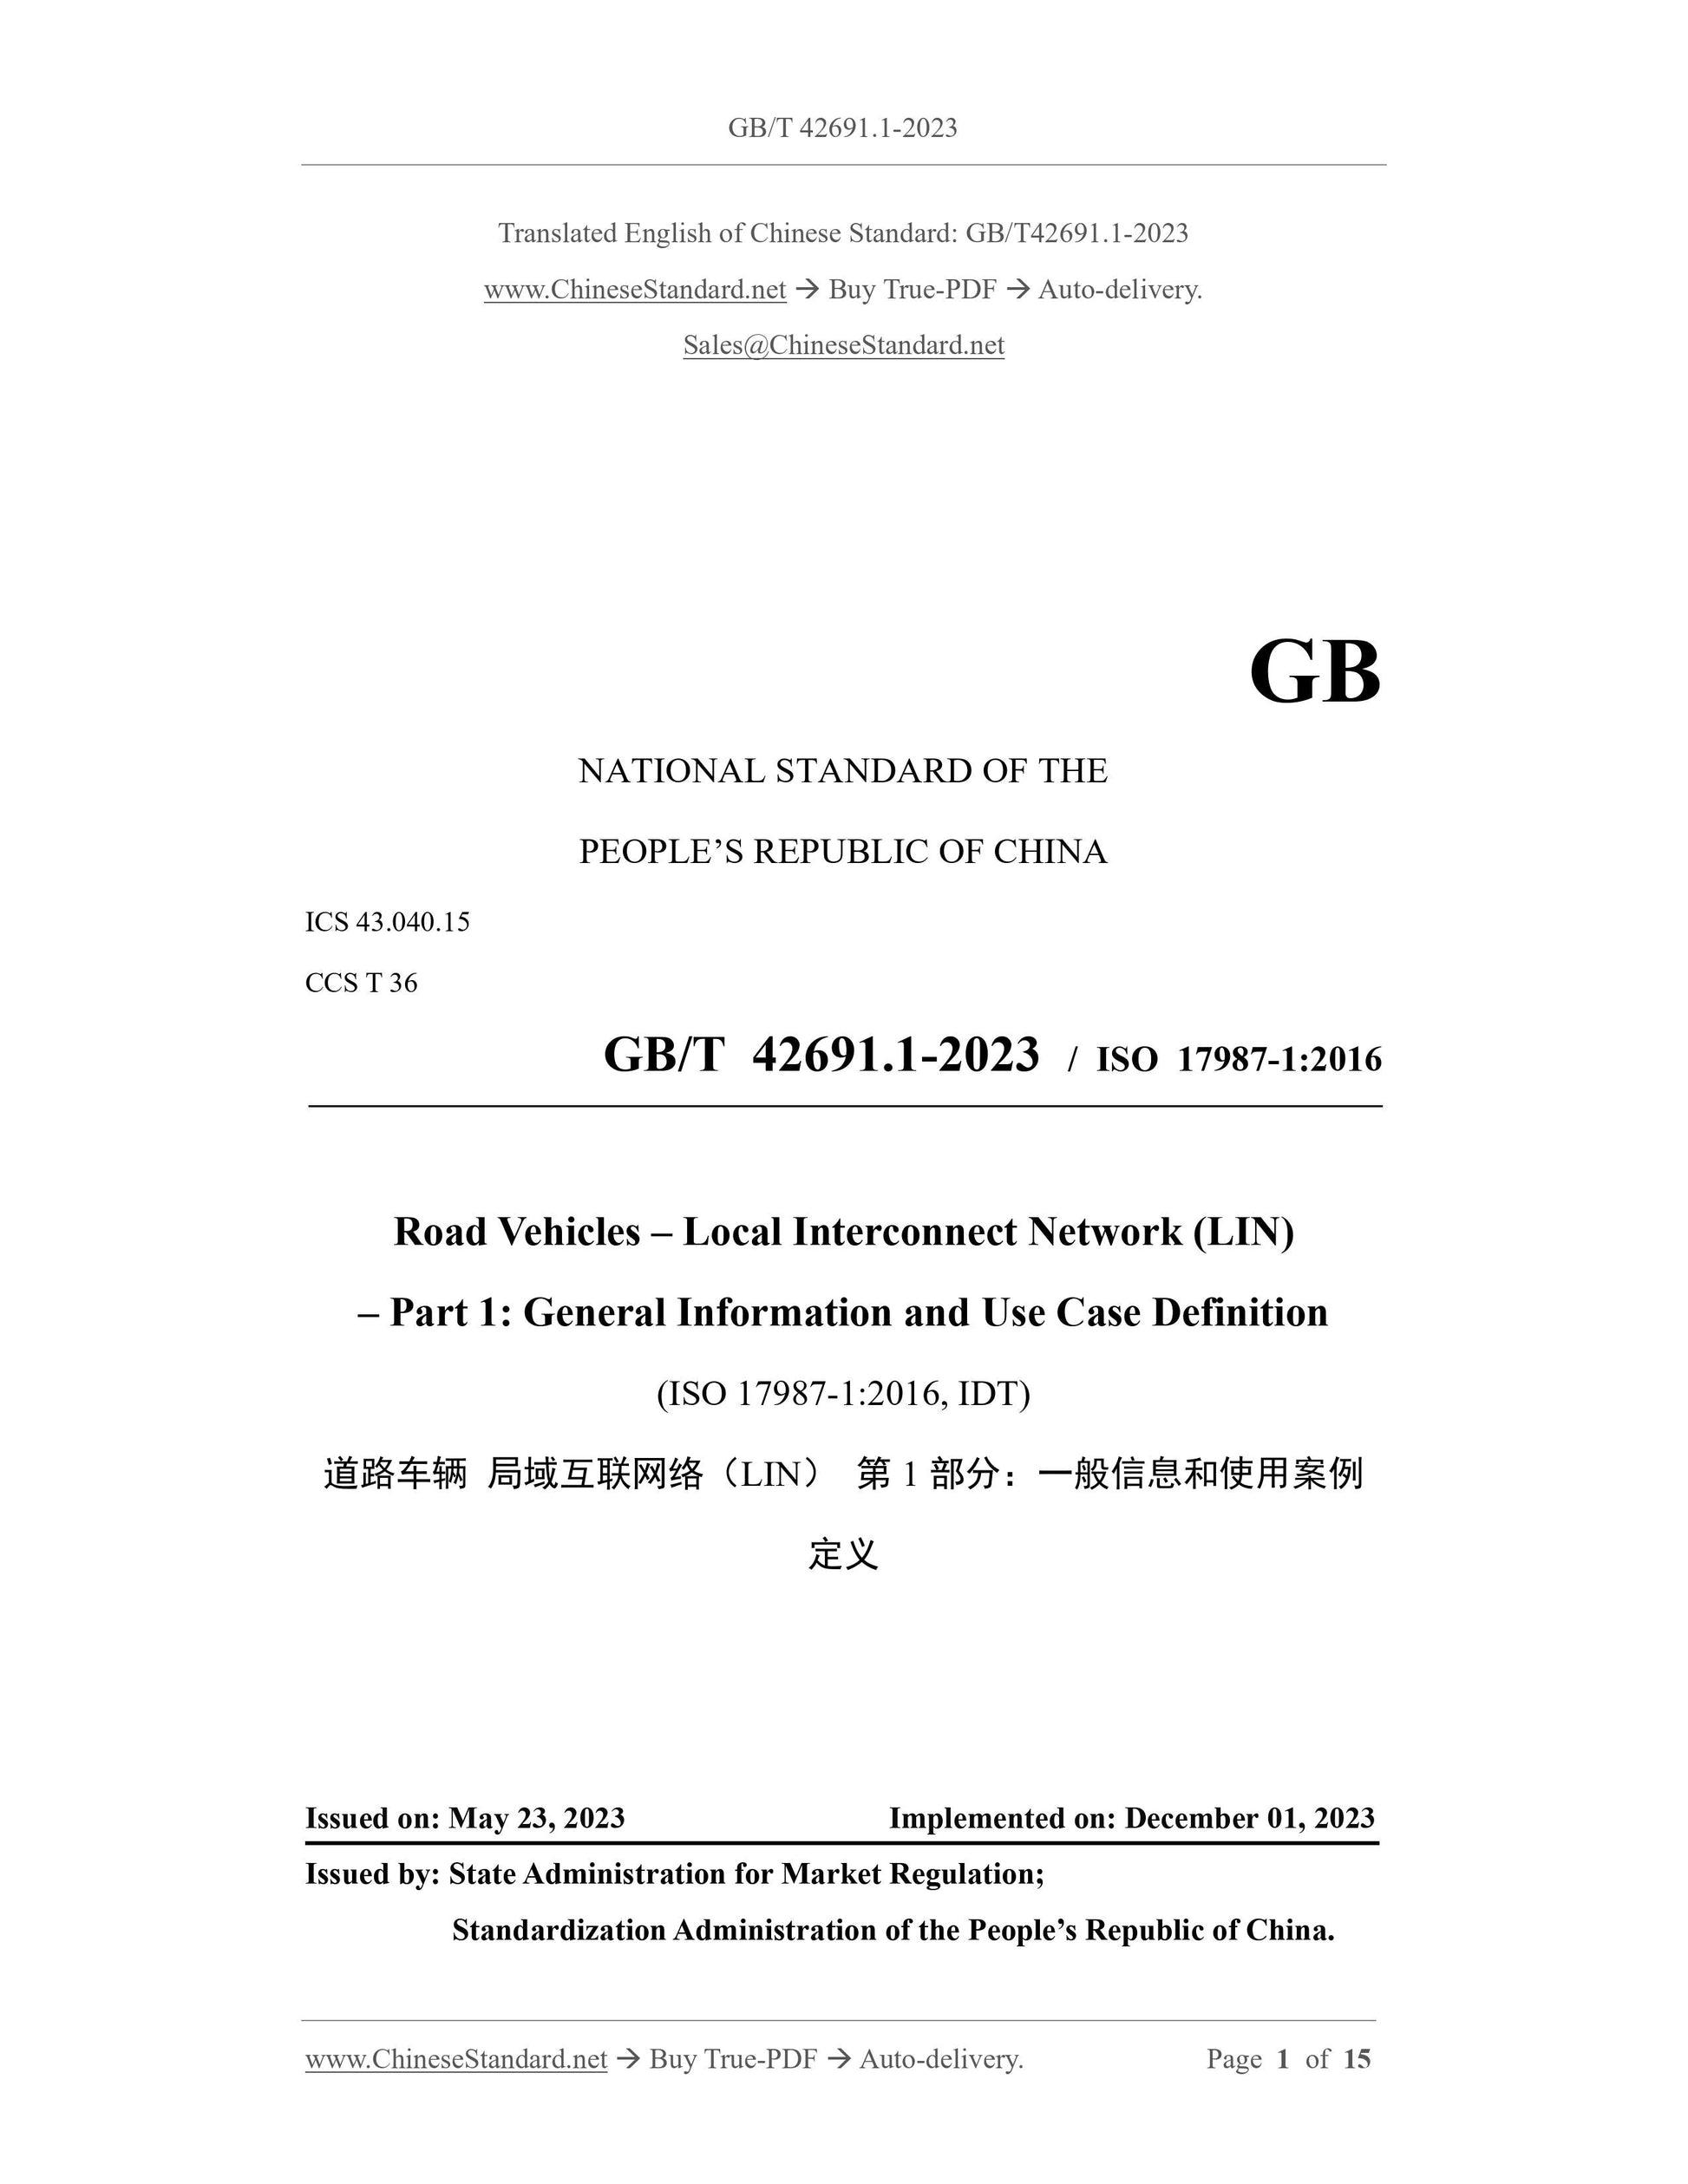 GB/T 42691.1-2023 Page 1